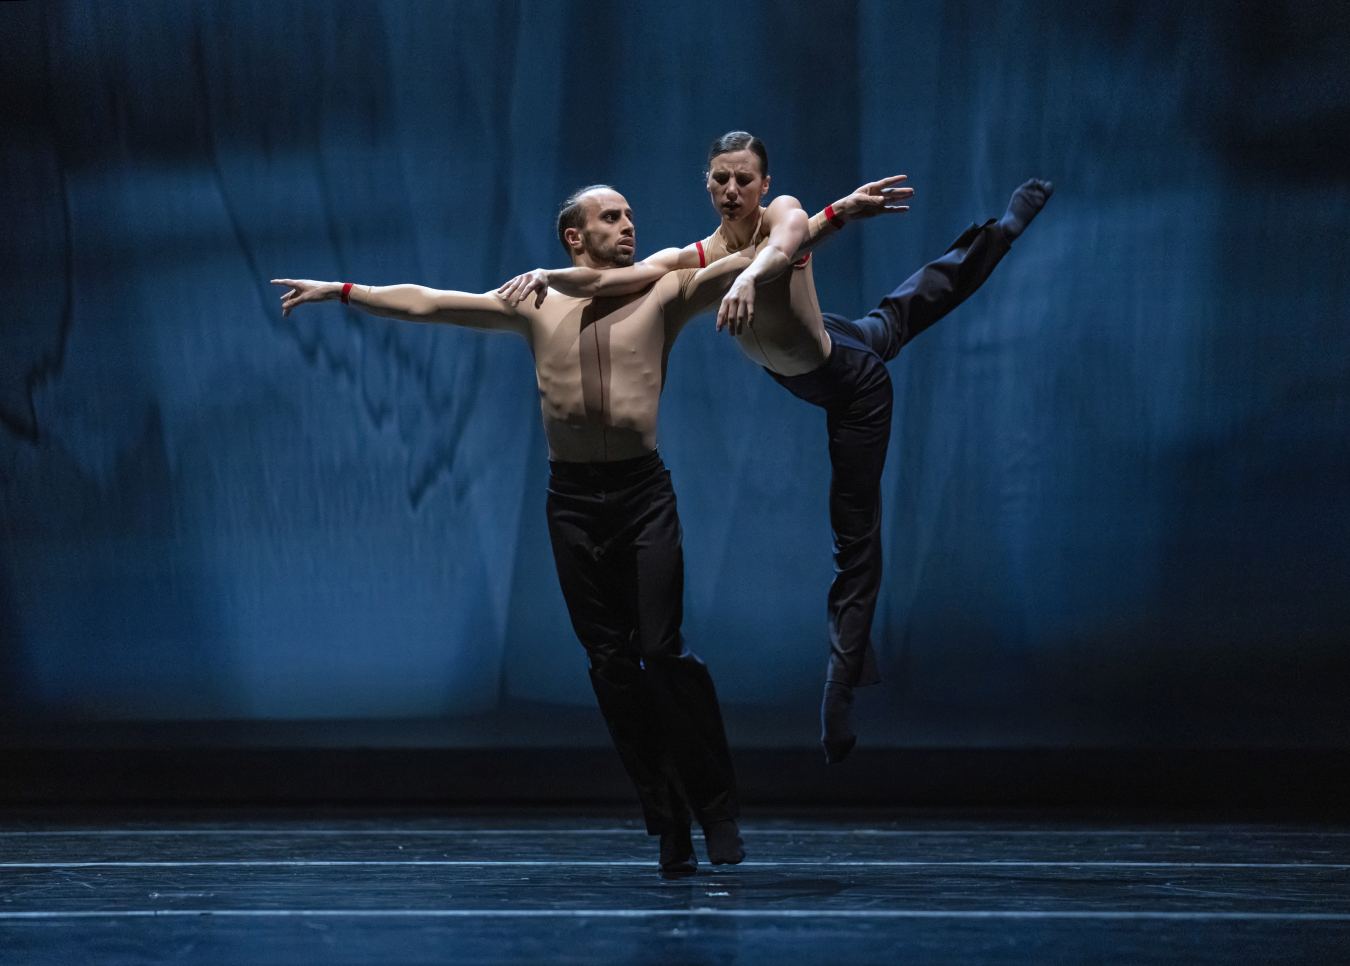 6. E.Nunes and S.-L.Chapman, “Handman” by E.Clug, Ballet of the State Theater Nuremberg 2022 © J.Vallinas